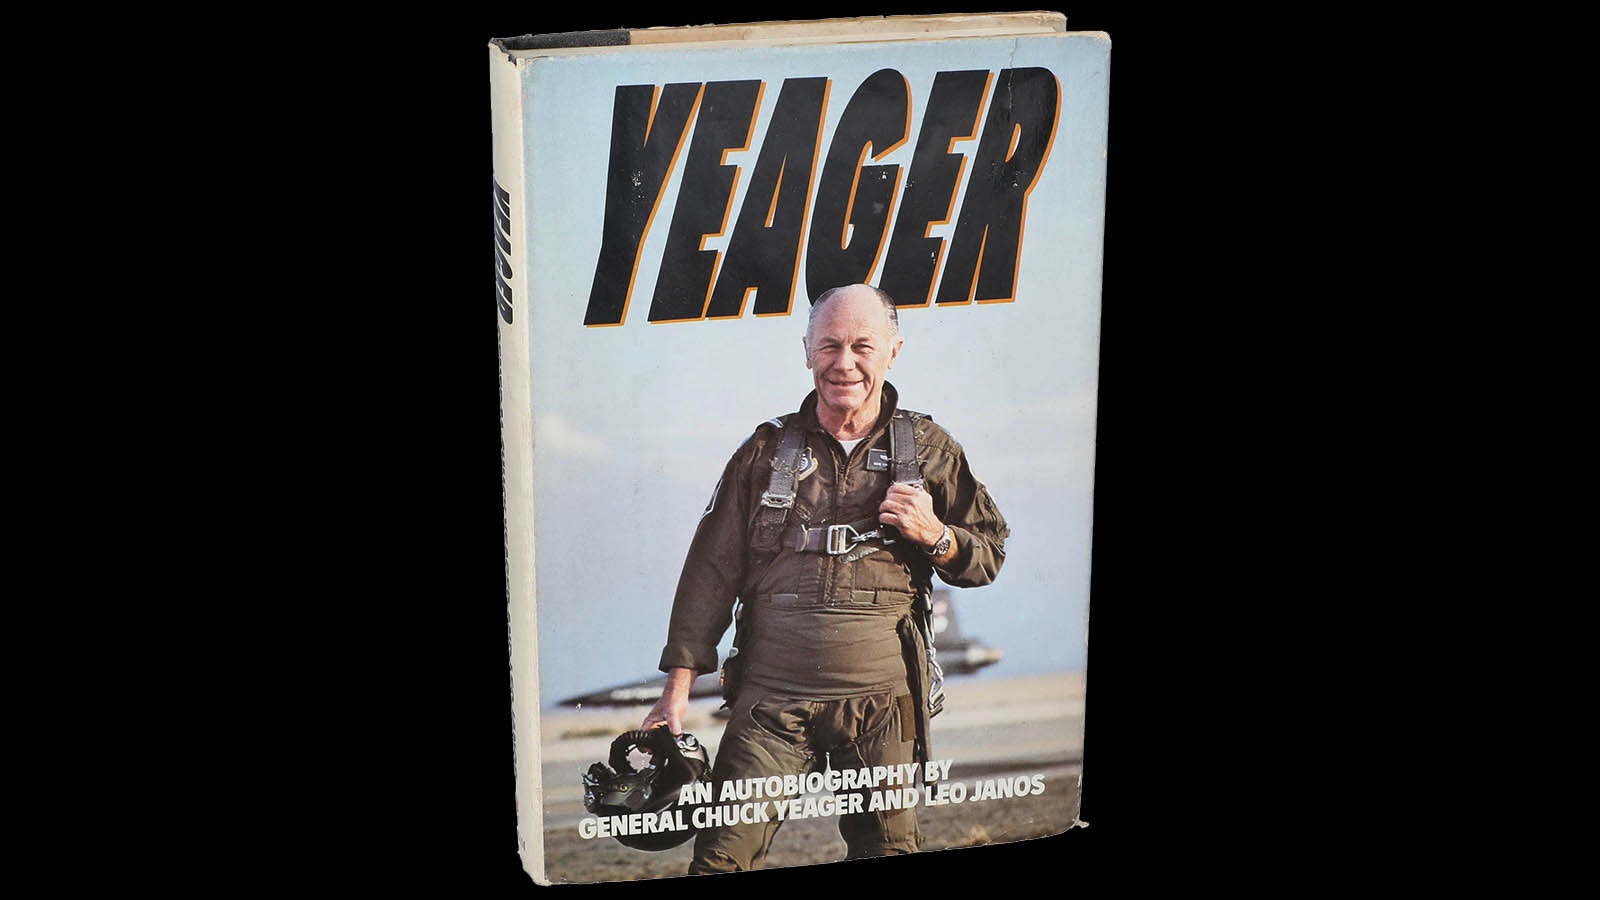 Famous aviator Chuck Yeager spent time at Casper Army Air Base before heading to Europe. While in Casper he managed to likely break wildlife game laws and, on another occasion, crashed his fighter plane.